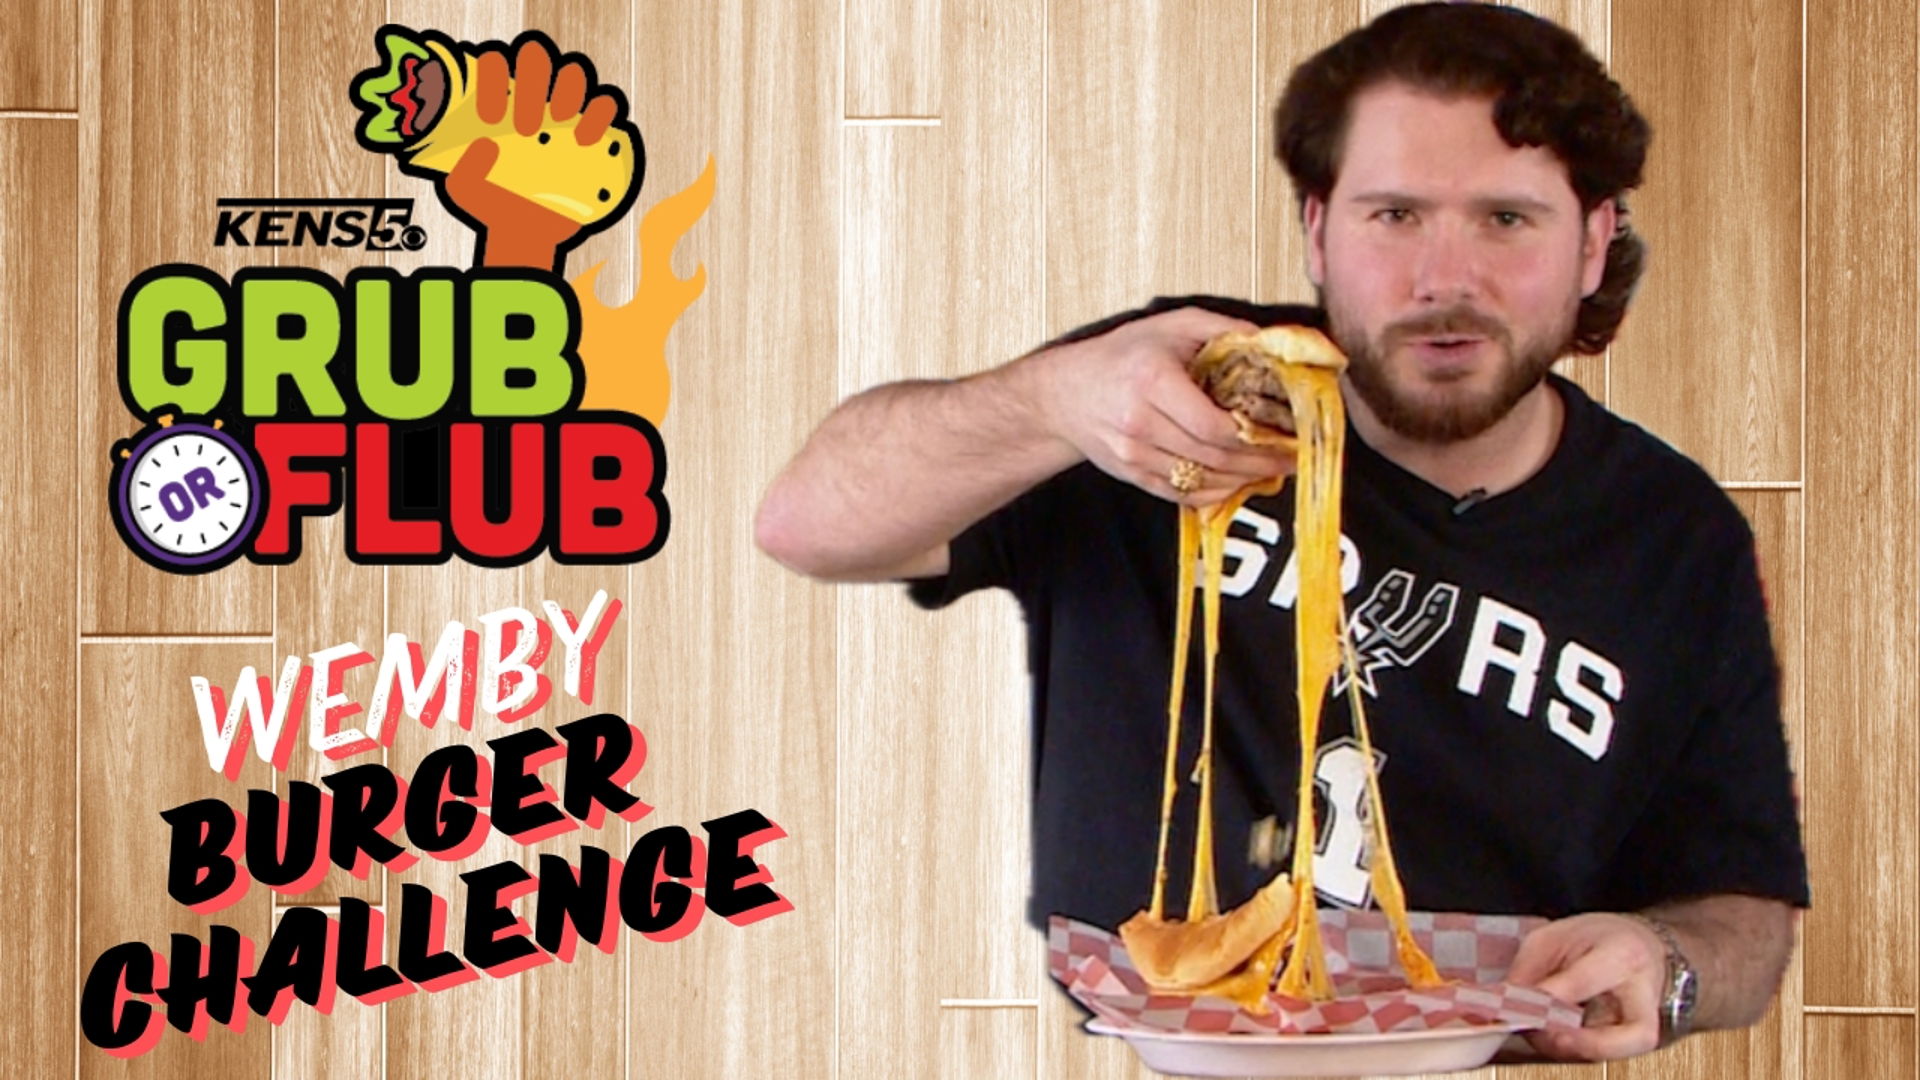 Luke attempts to break the all-time record for fastest to finish the Wemby burger.